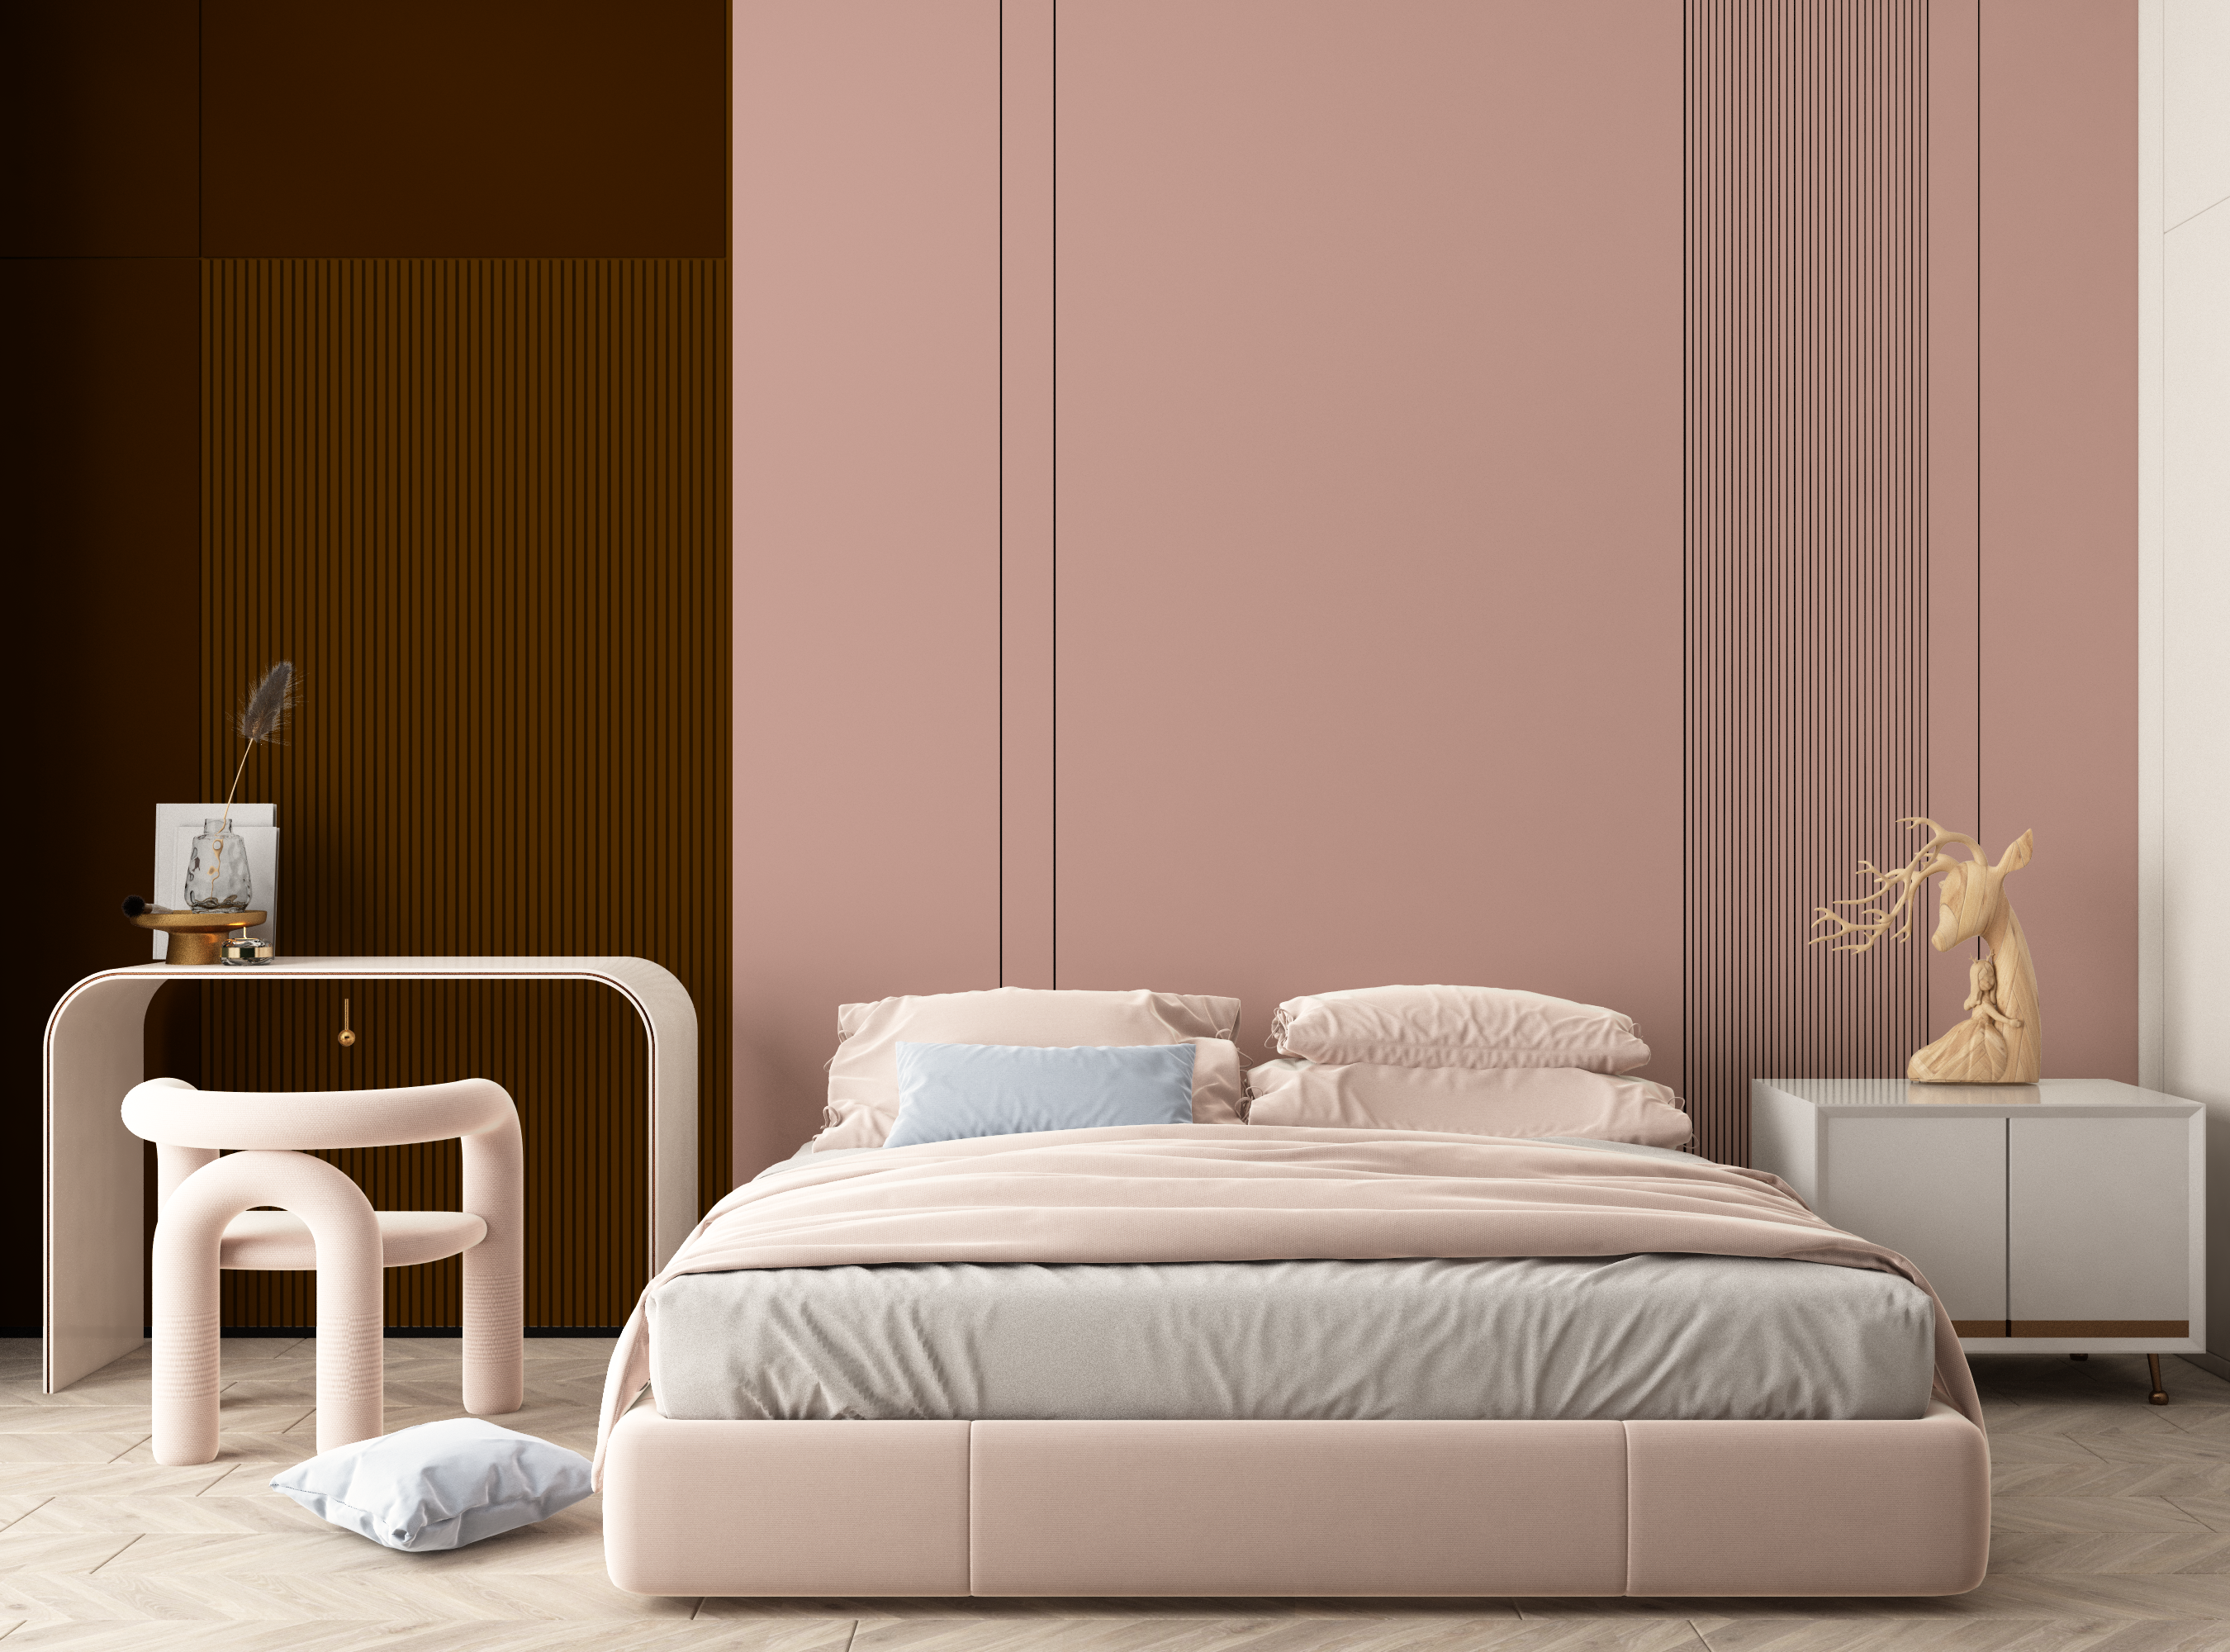 Pink and Brown two colour combination bedroom wall